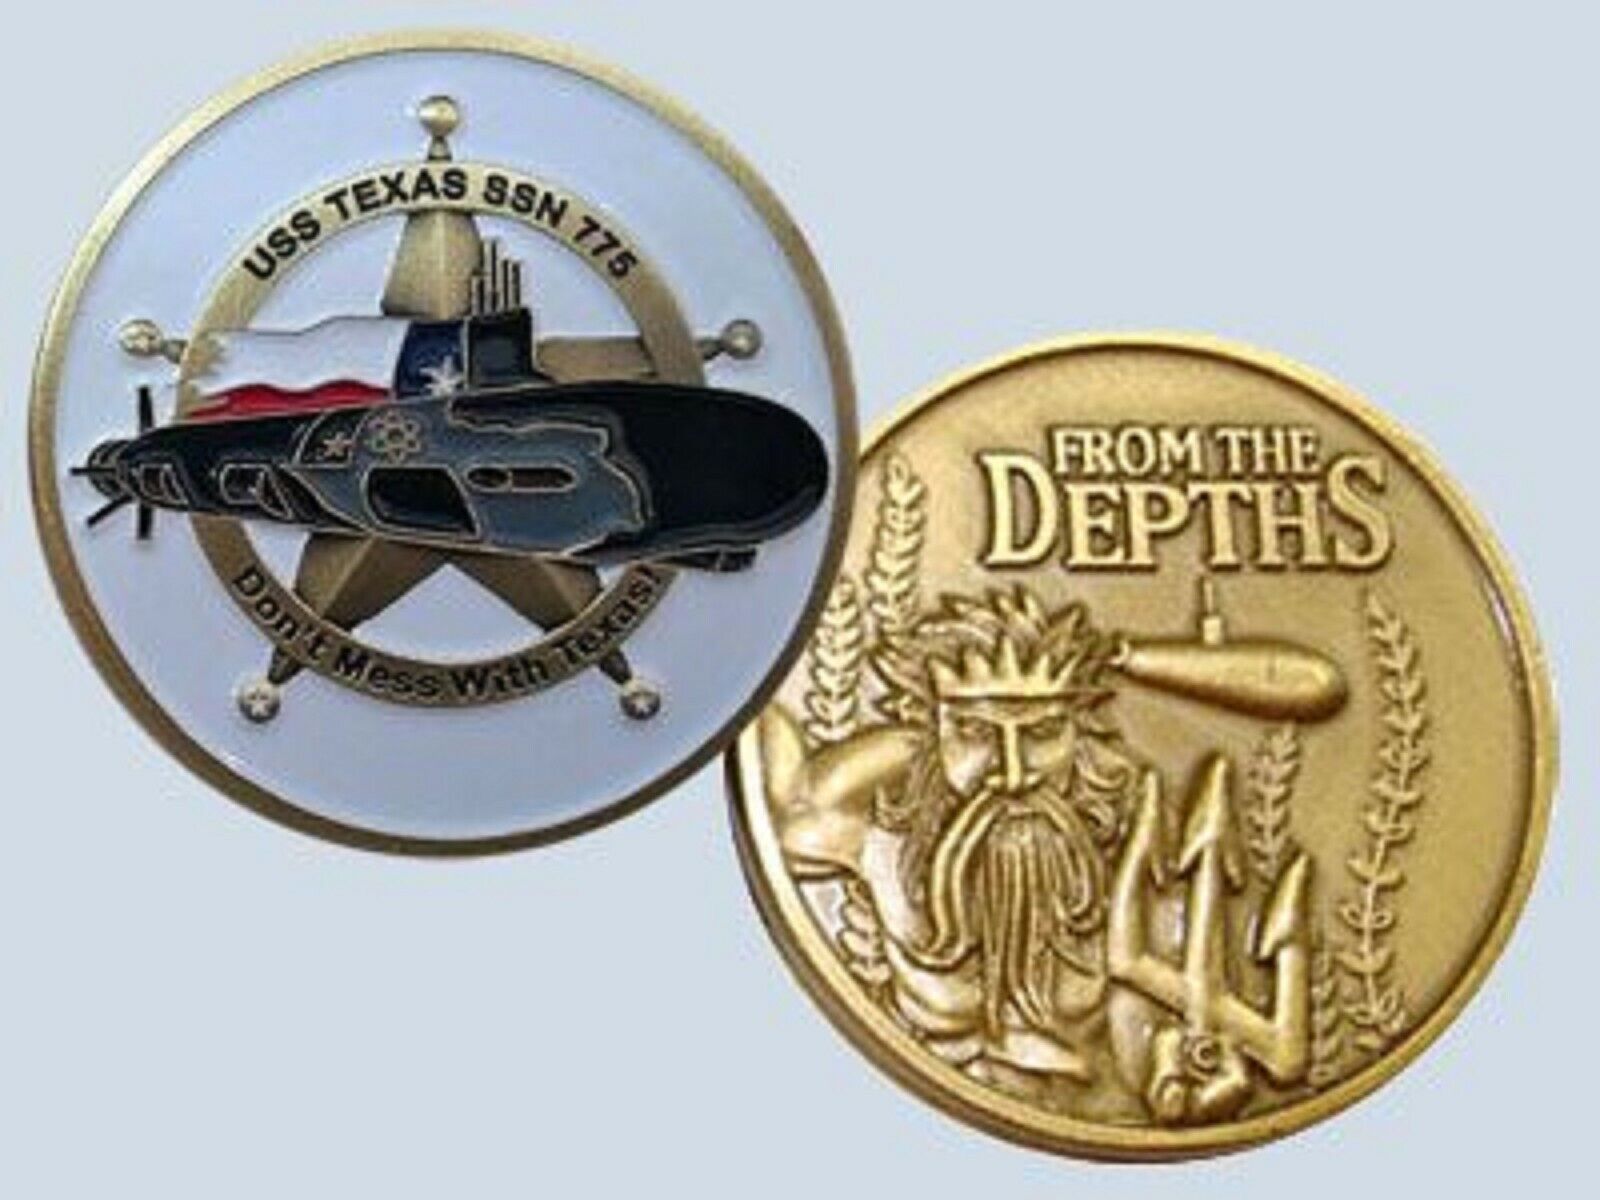 NAVY USS TEXAS SSN-75 FROM THE DEPTHS CHALLENGE COIN